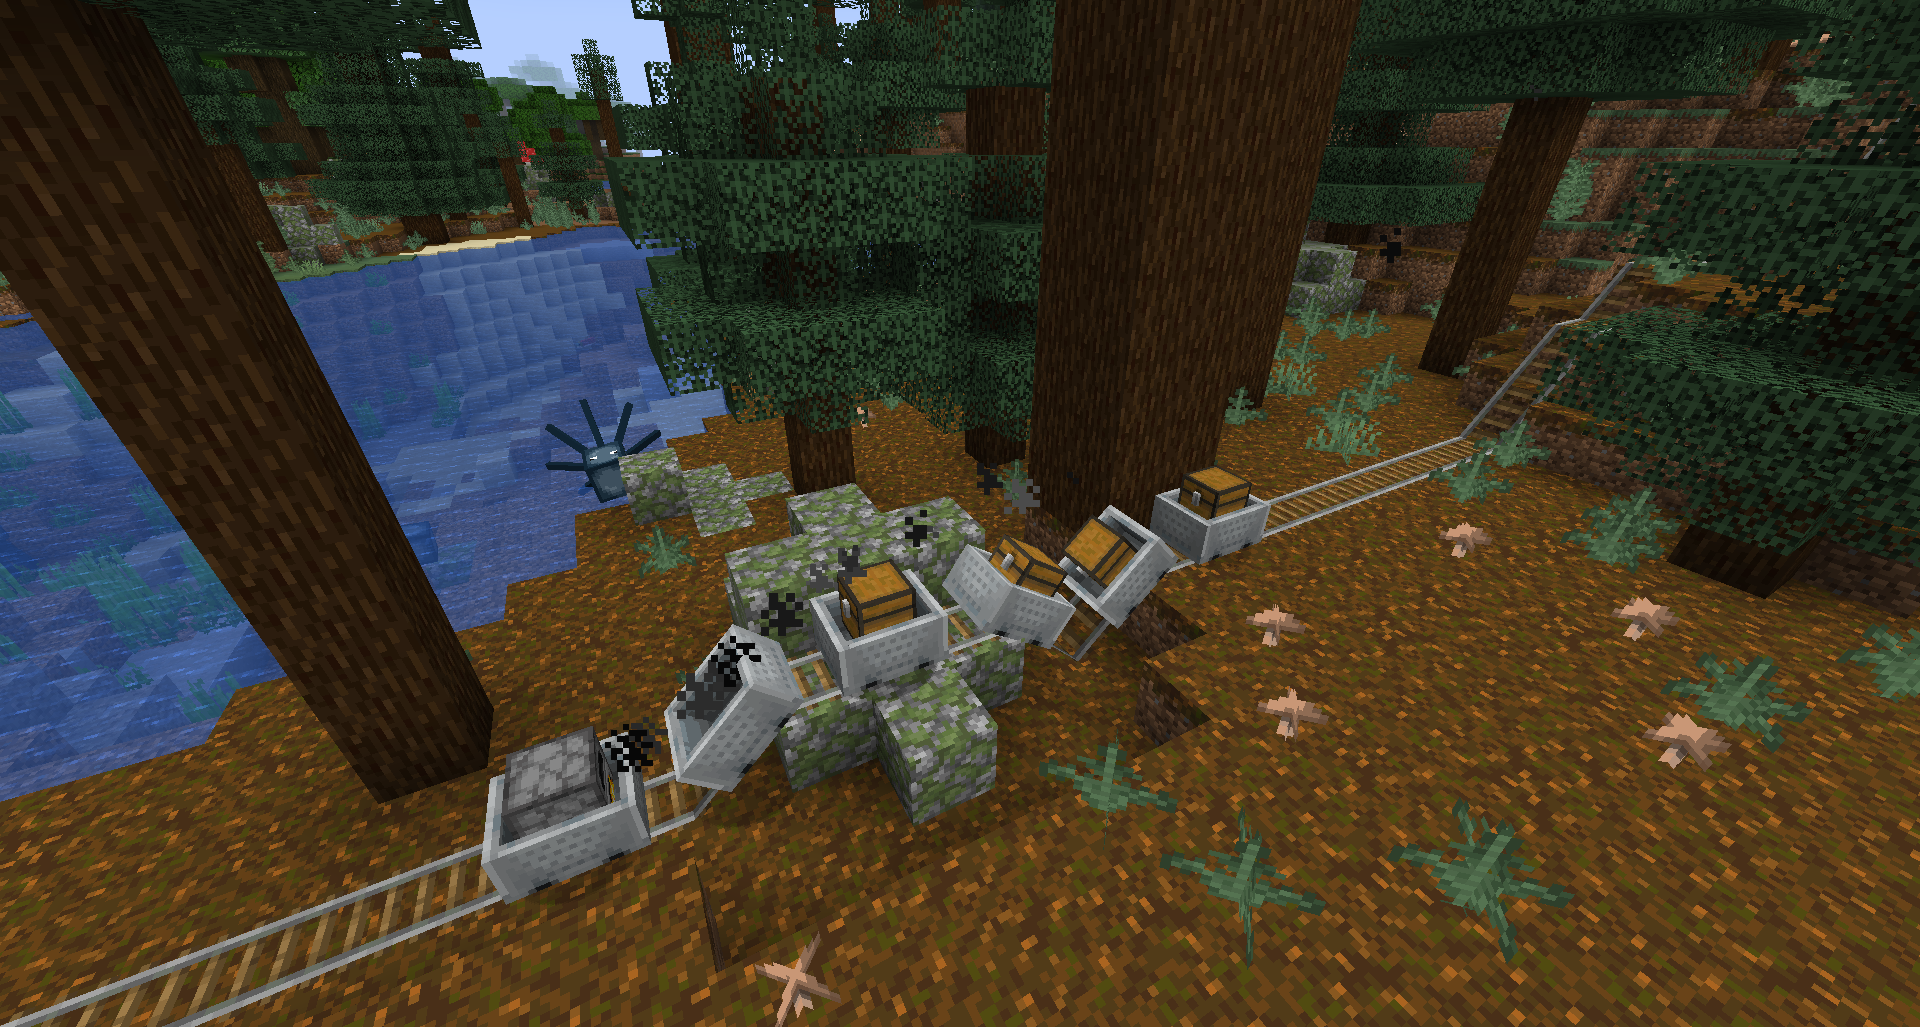 Minecart Train going over bumps